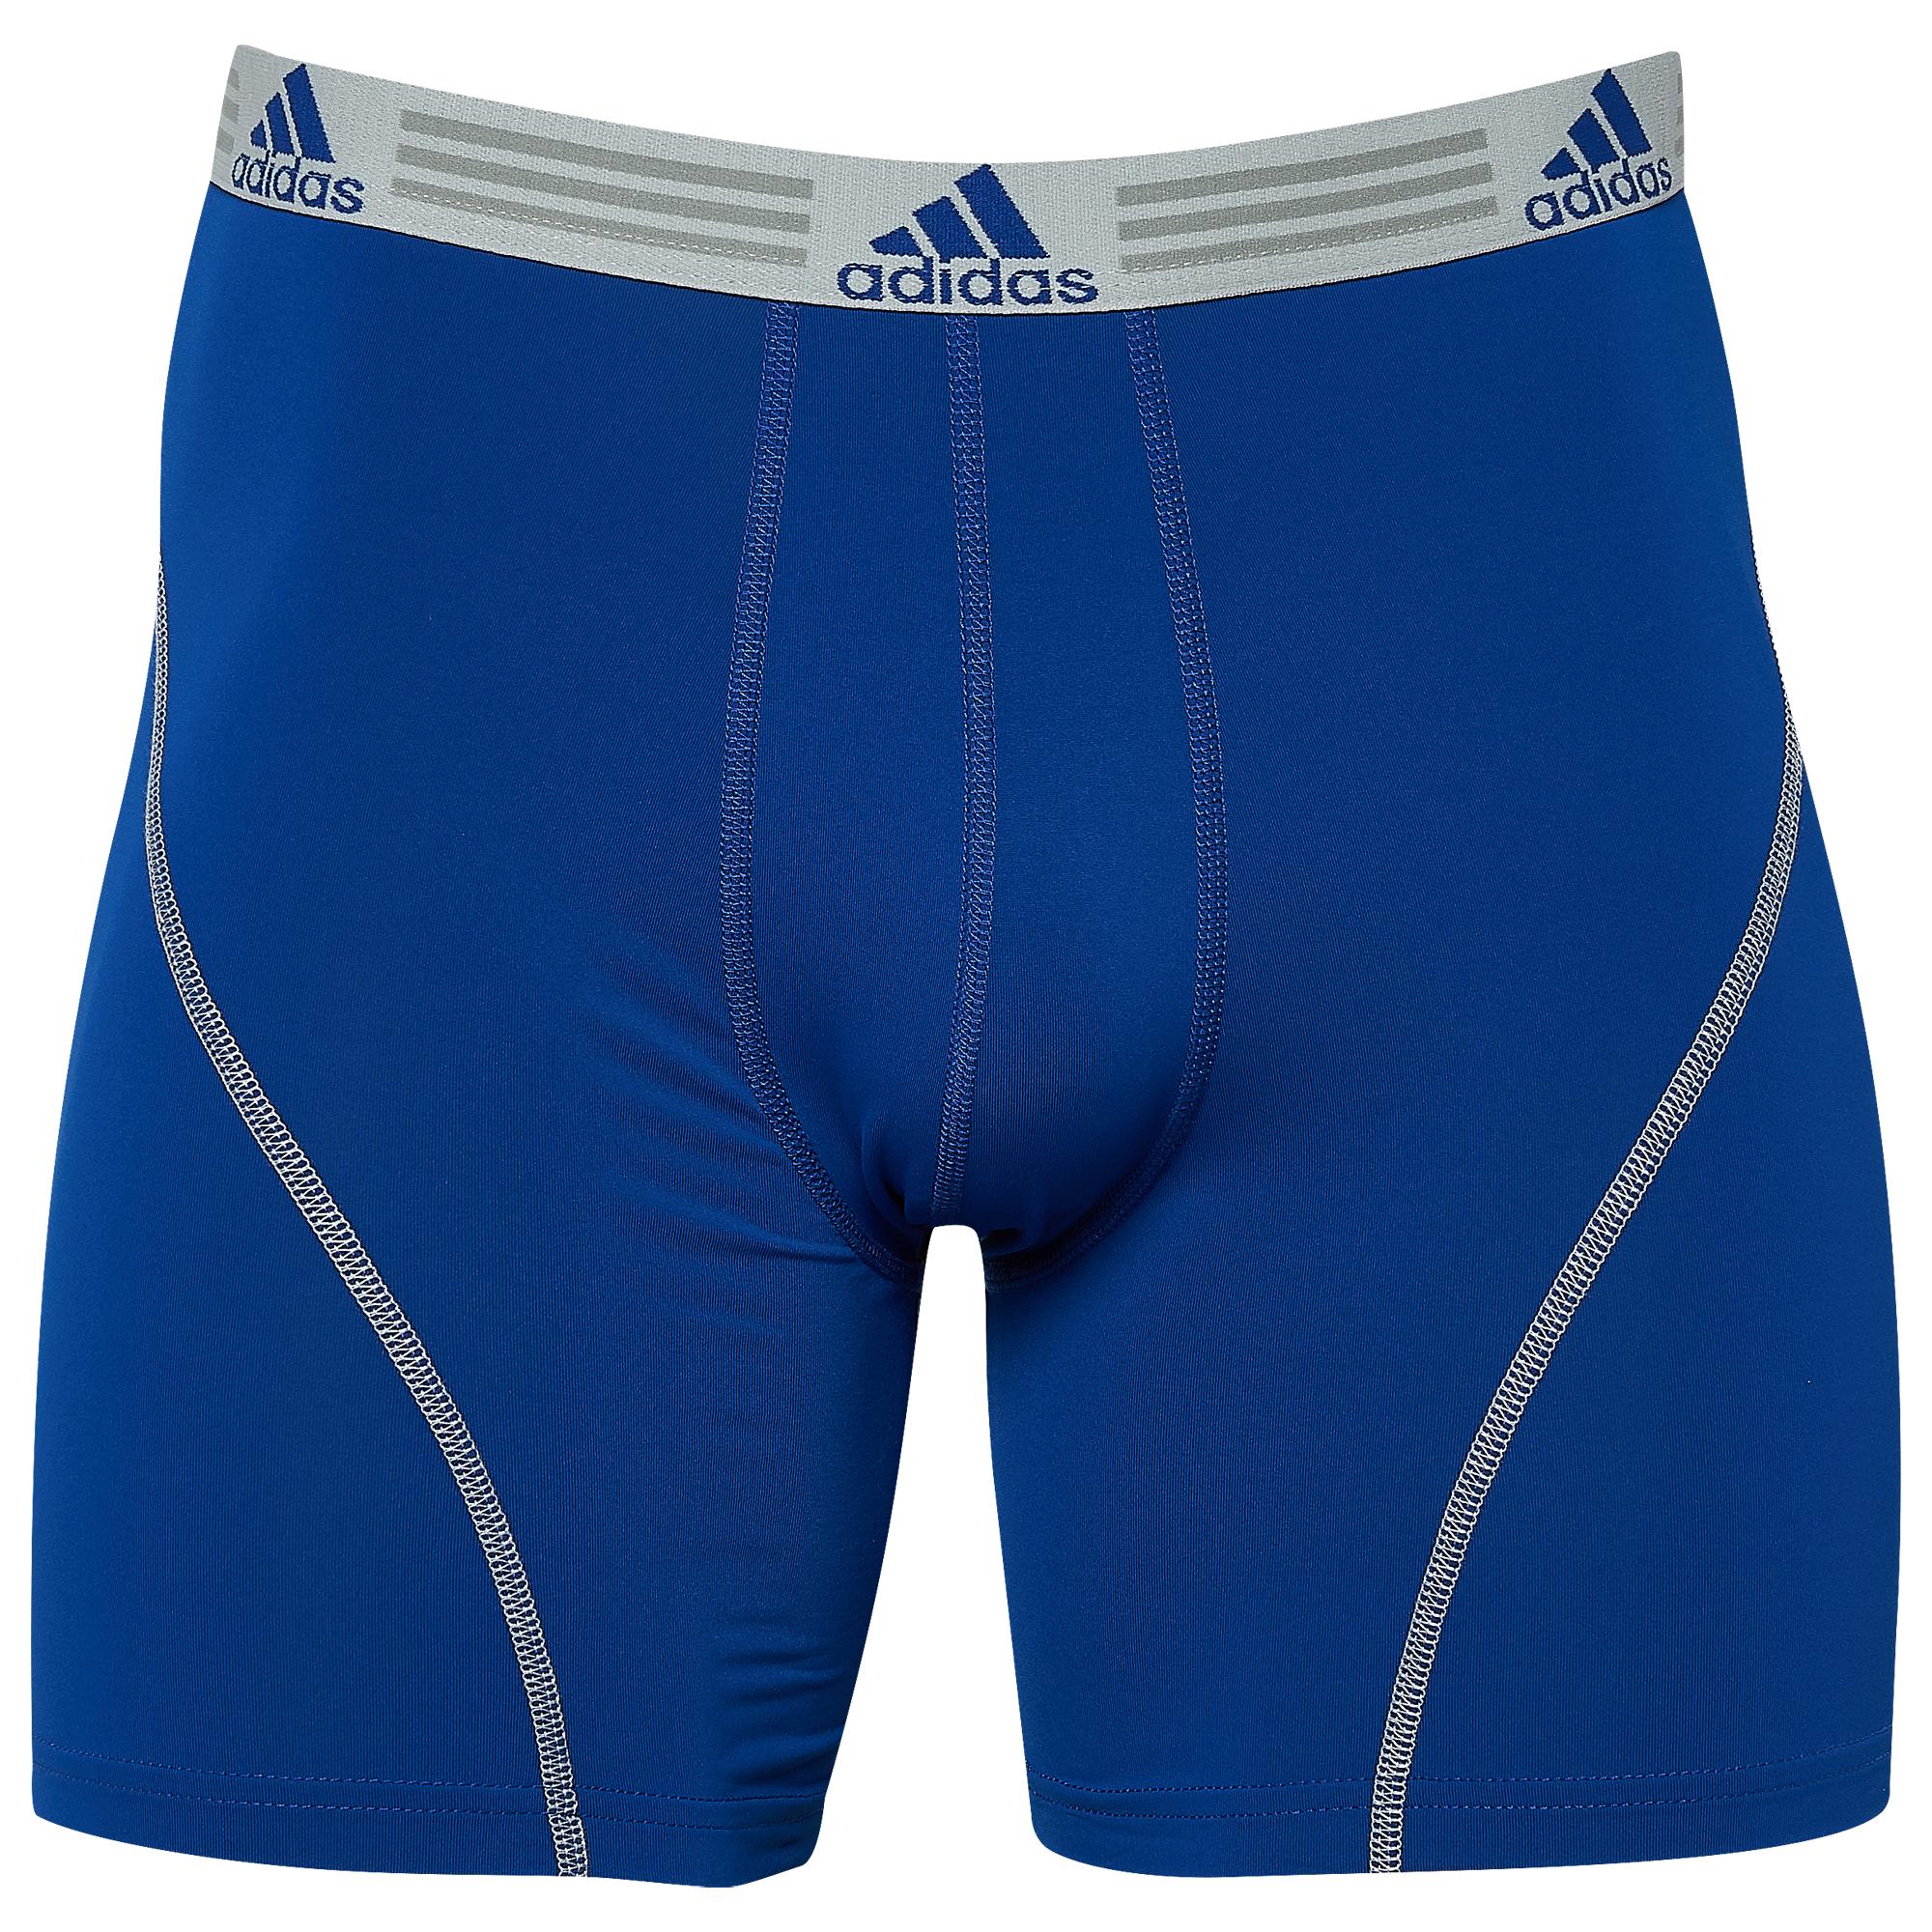 10 Minute Adidas workout underwear for Build Muscle